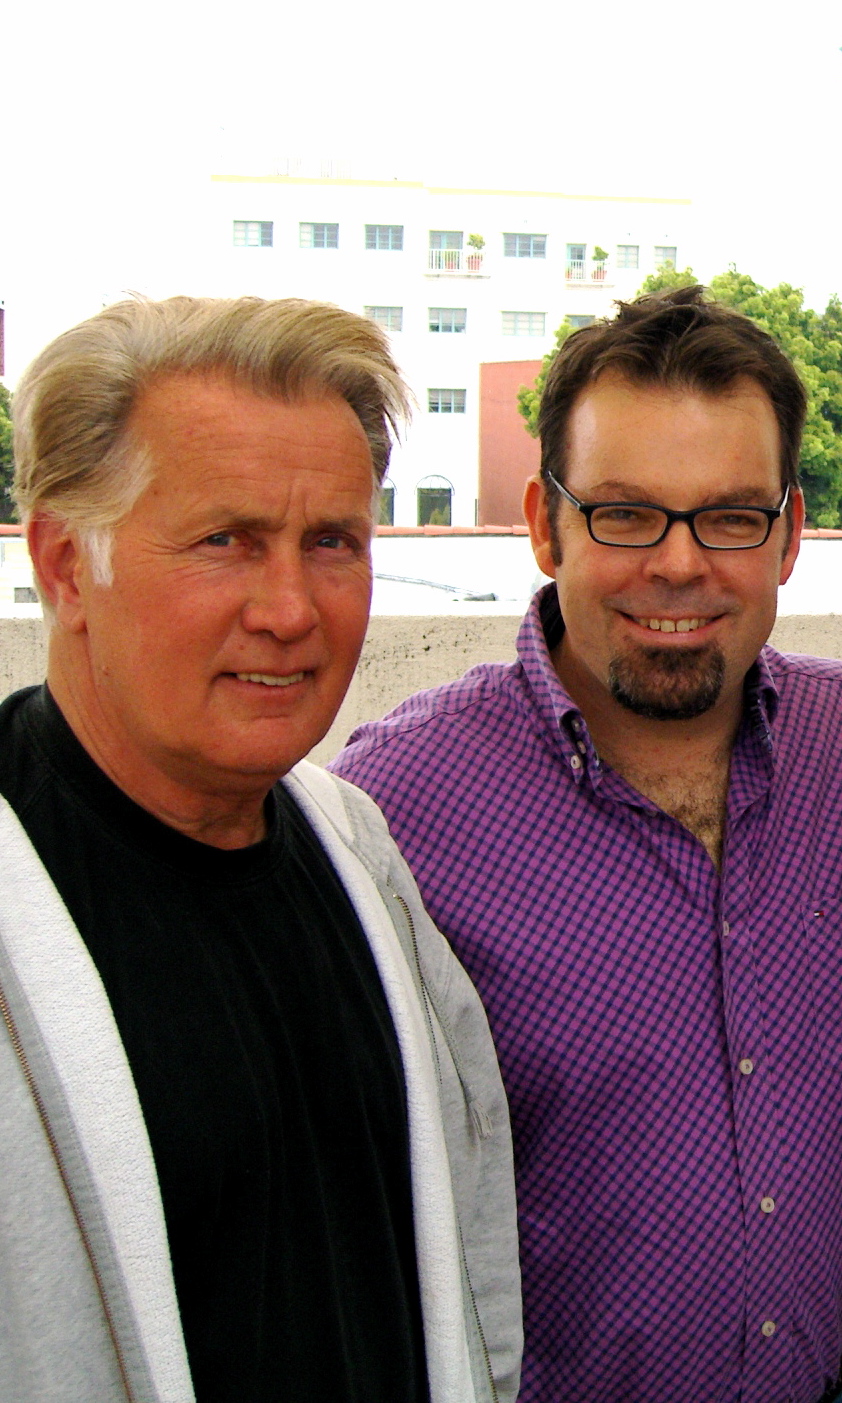 Martin Sheen with Jeffrey Travis during the recording of Flatland